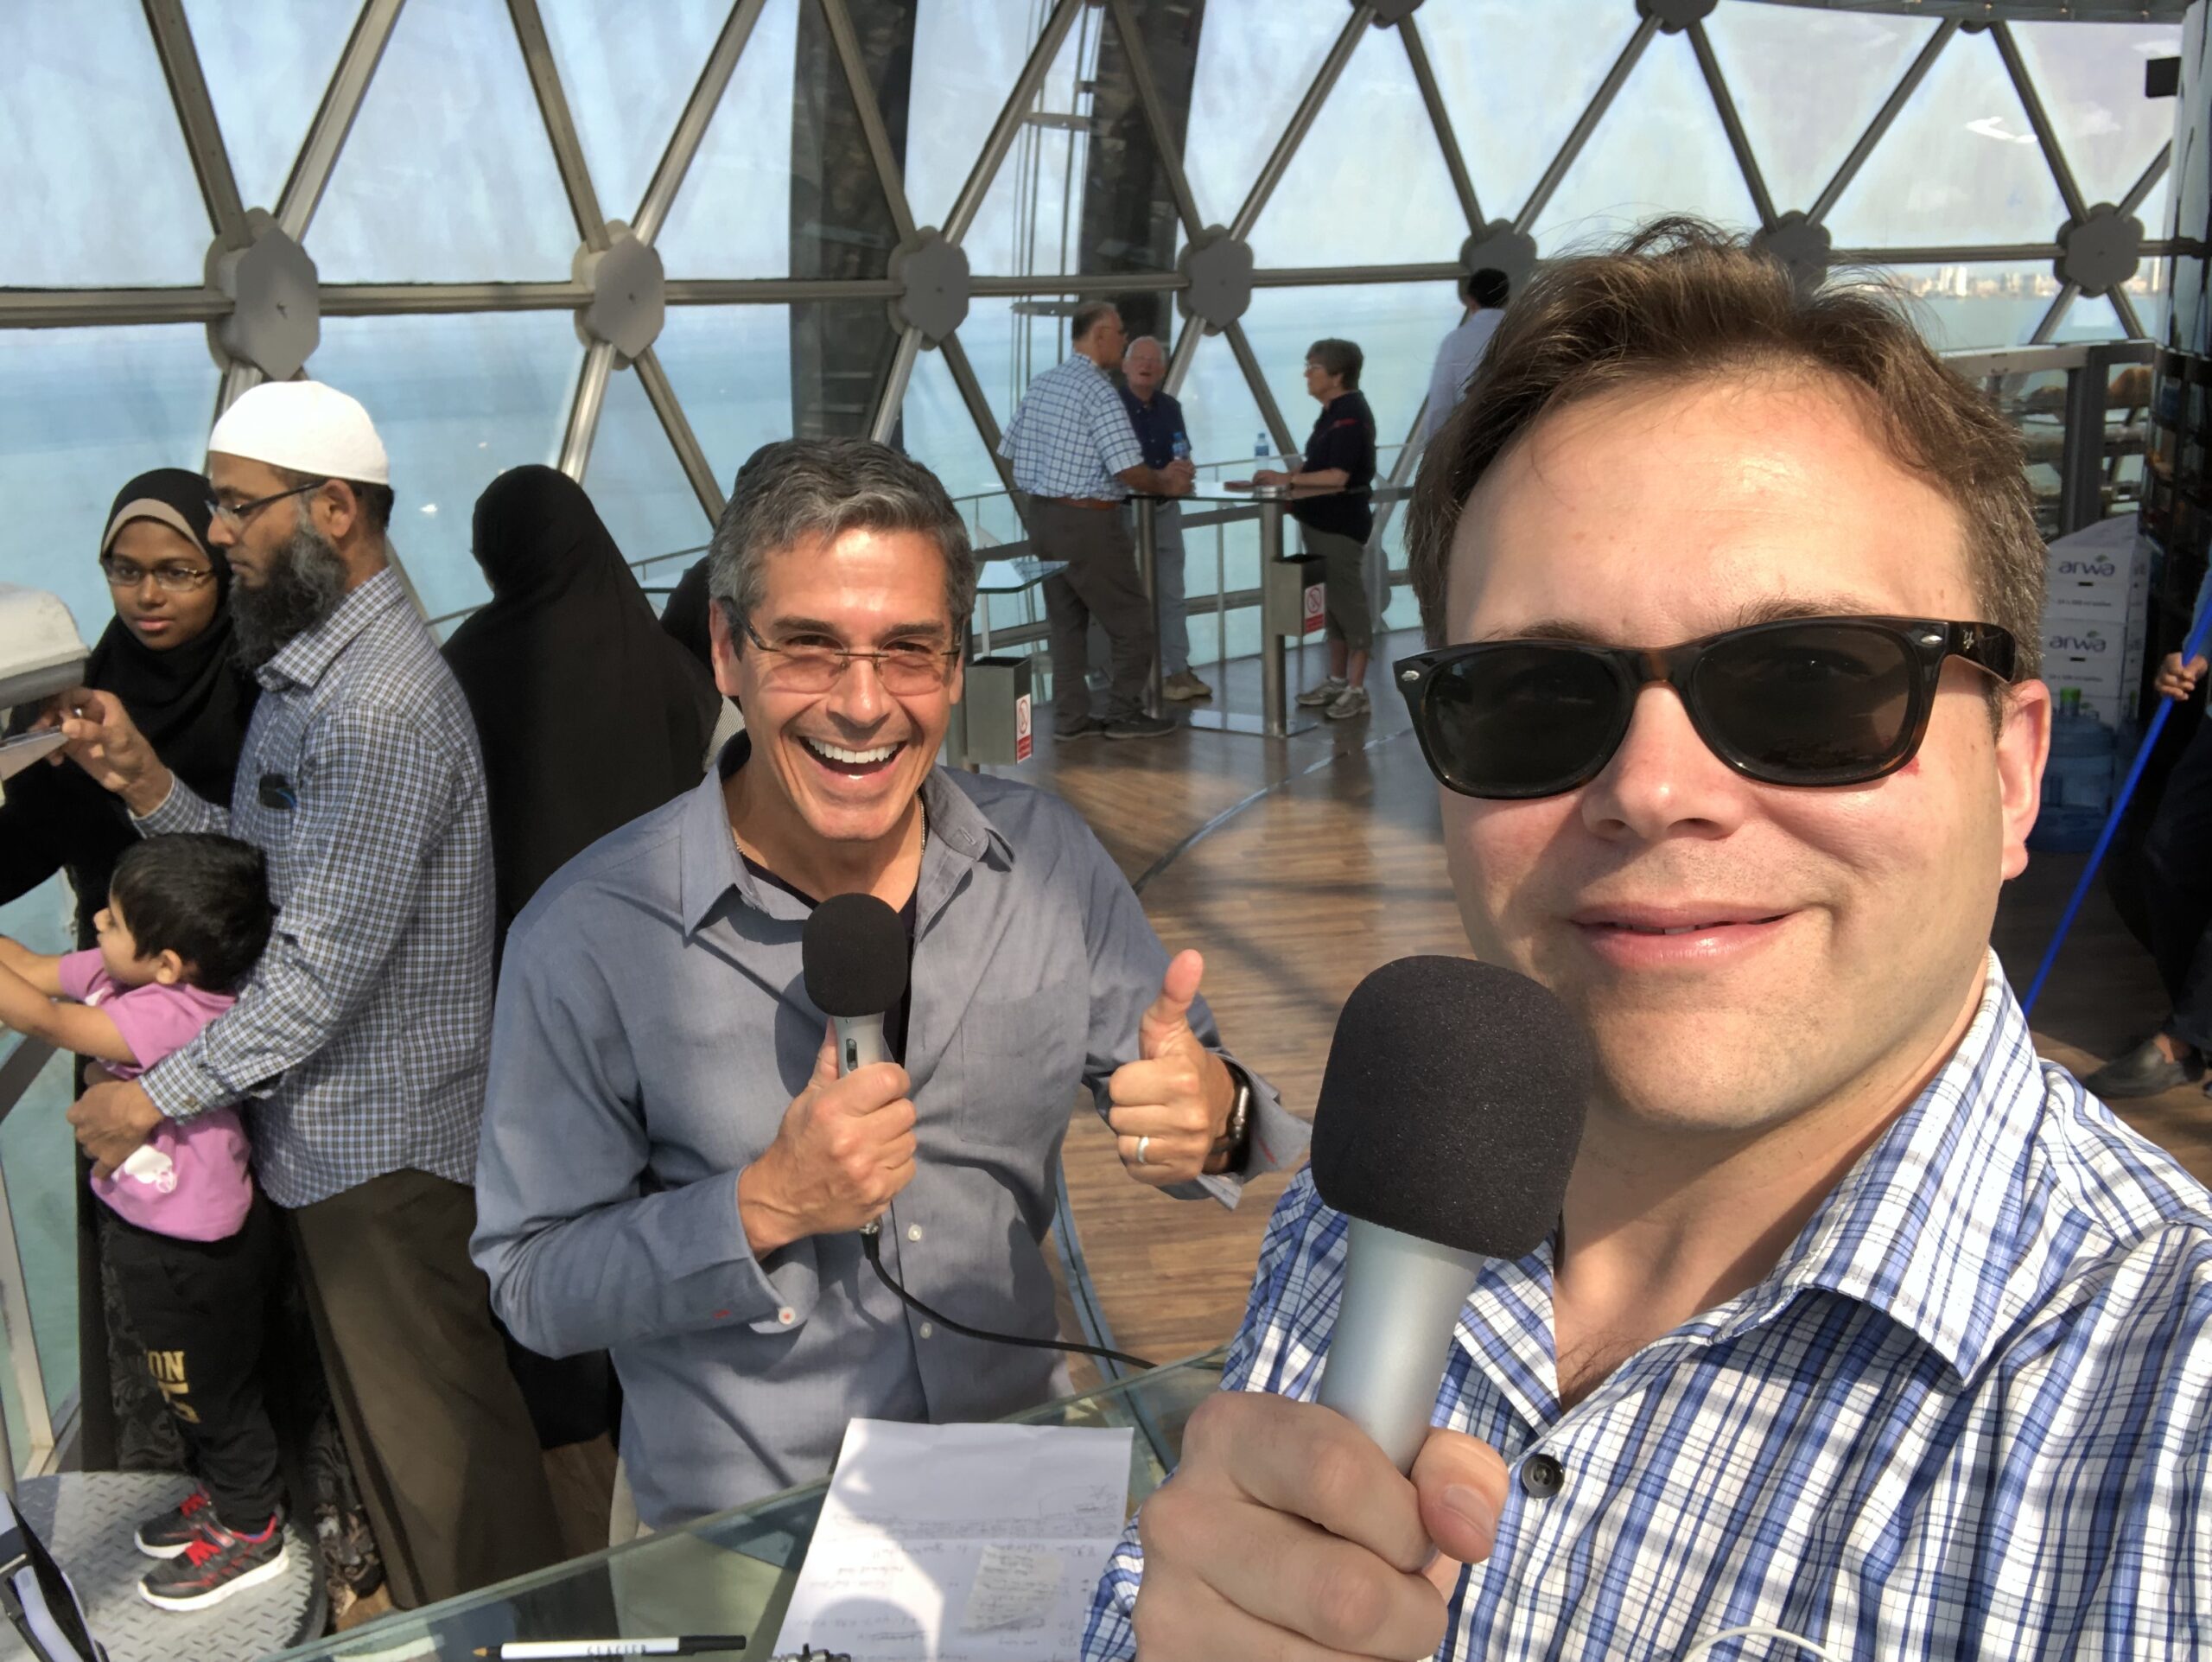 Recording a Podcast from Kuwait Towers